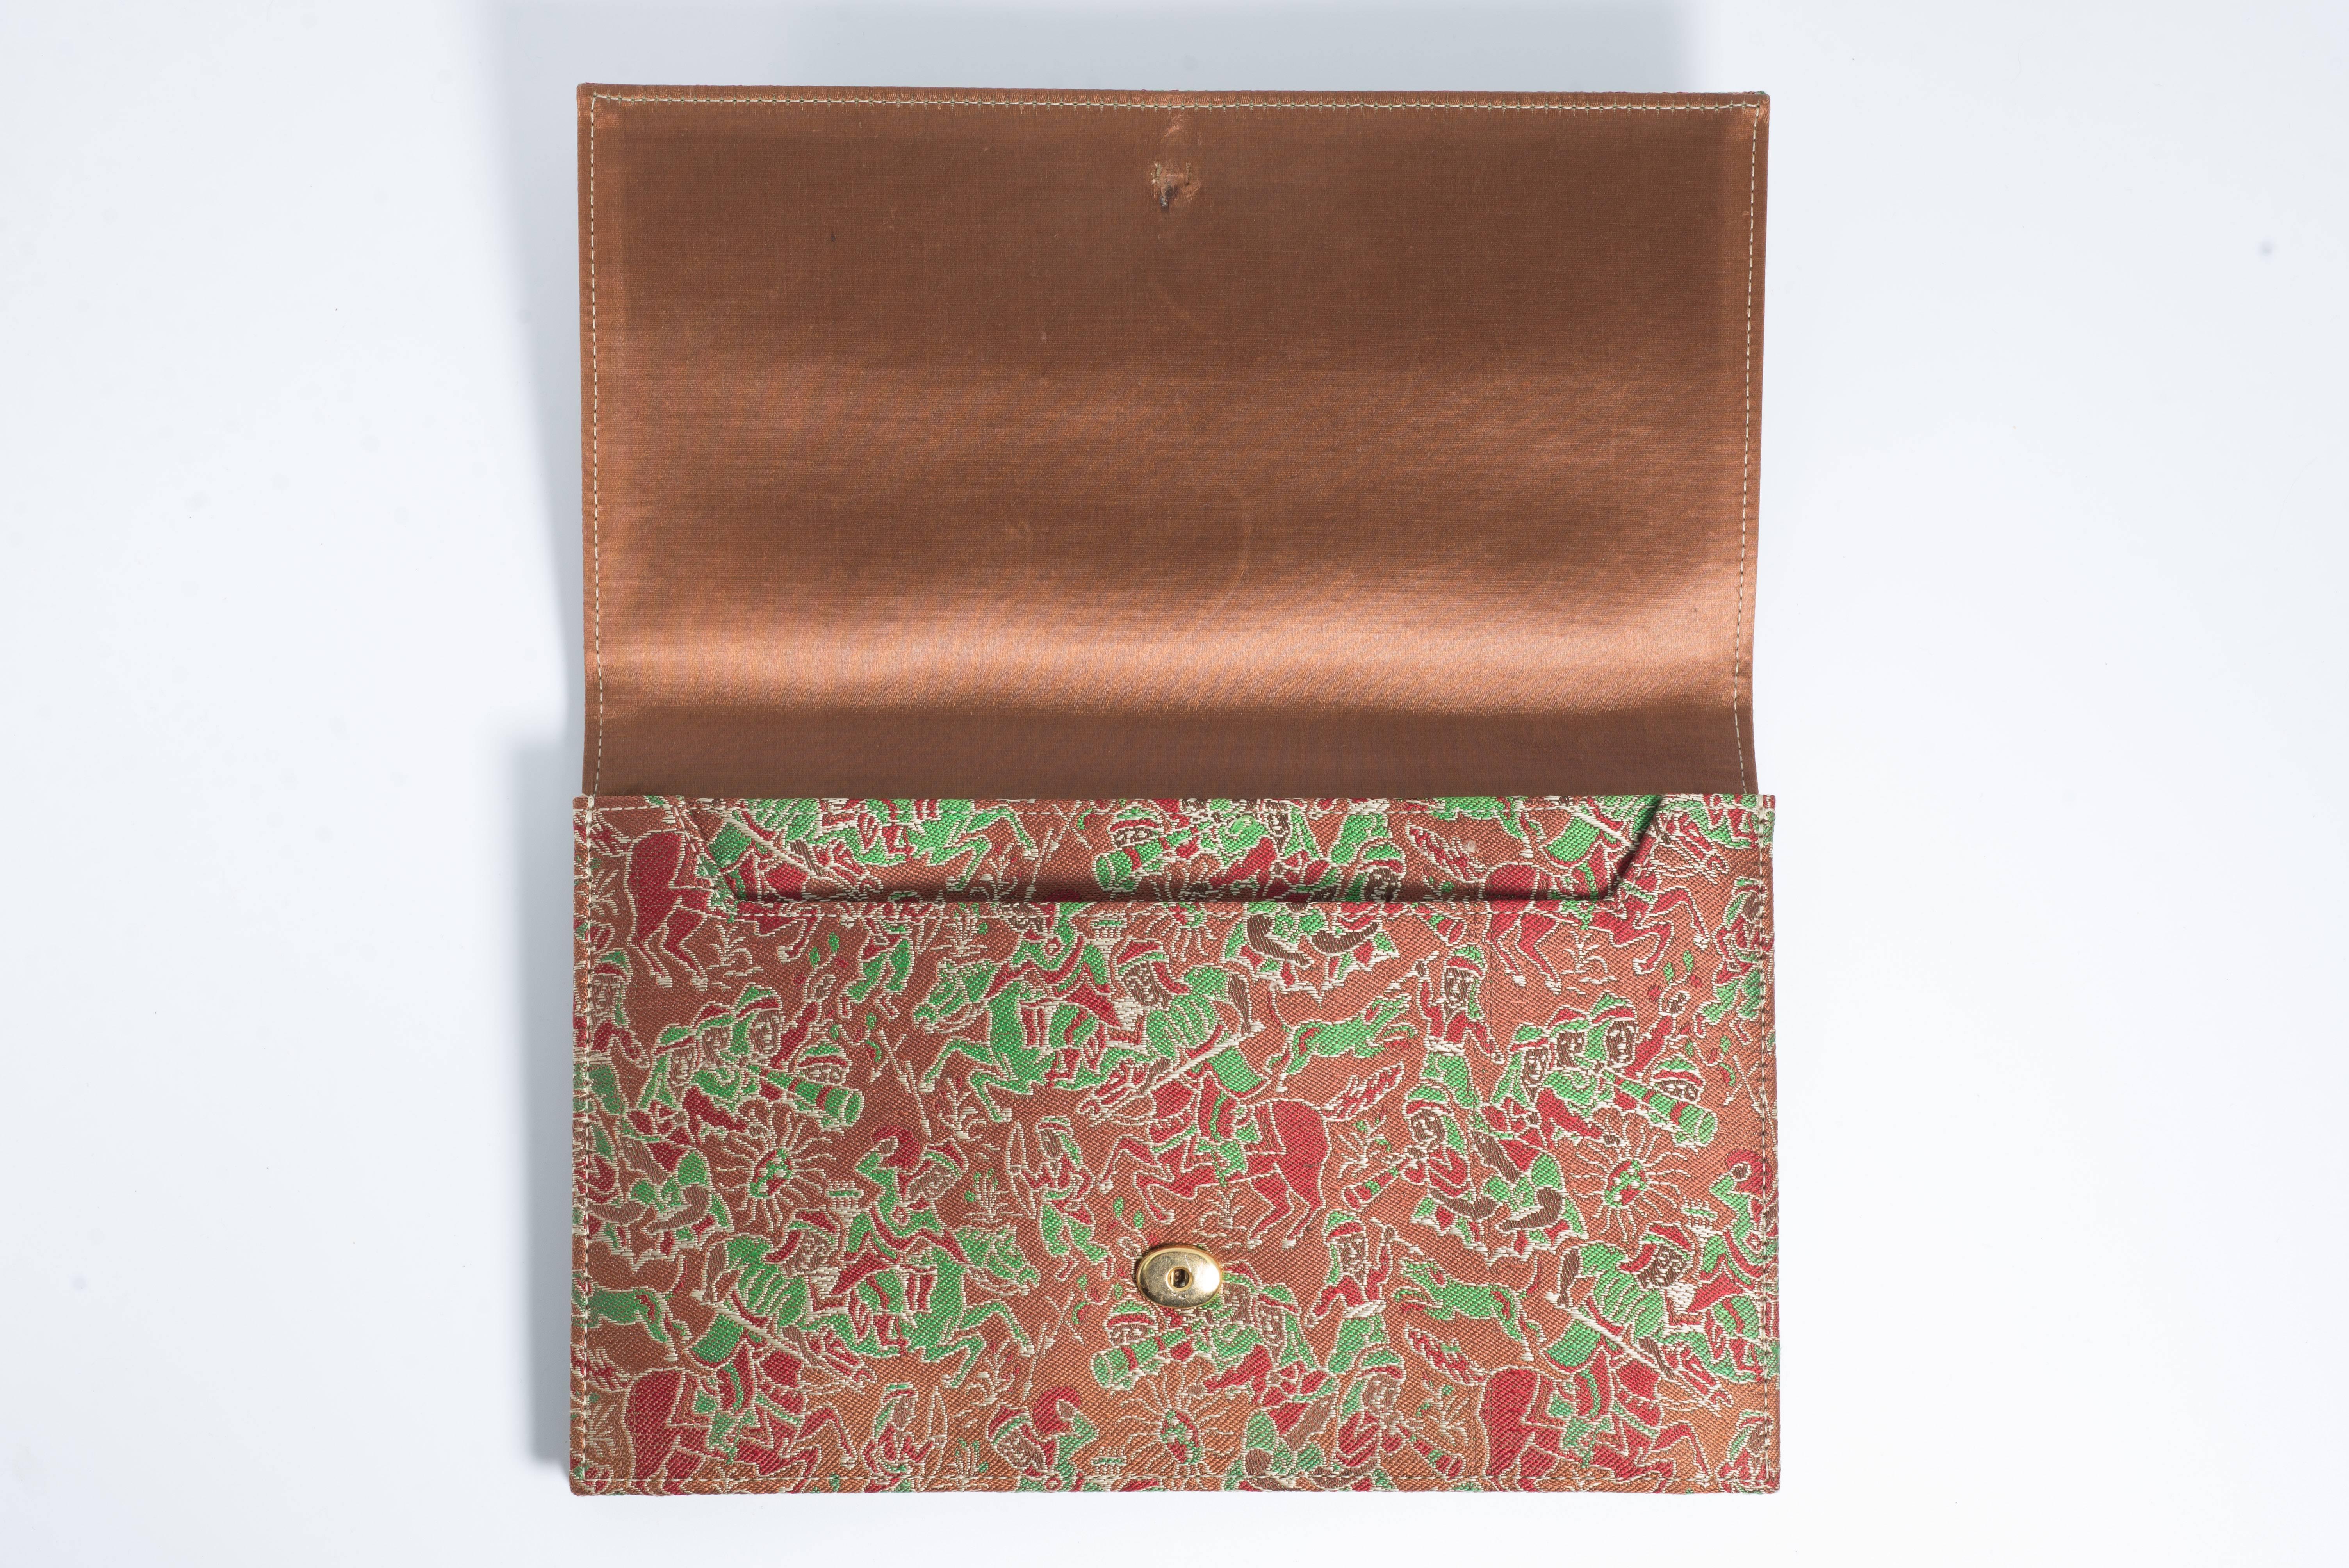 Mint condition vintage Bianchini Ferrier silk Persian themed fabric for Cartier evening pochettes made by Clive Shilton, who designed and made Princess Diana's bridal purse and shoes.

These are all offered here on 1stdibs for the first time. Made